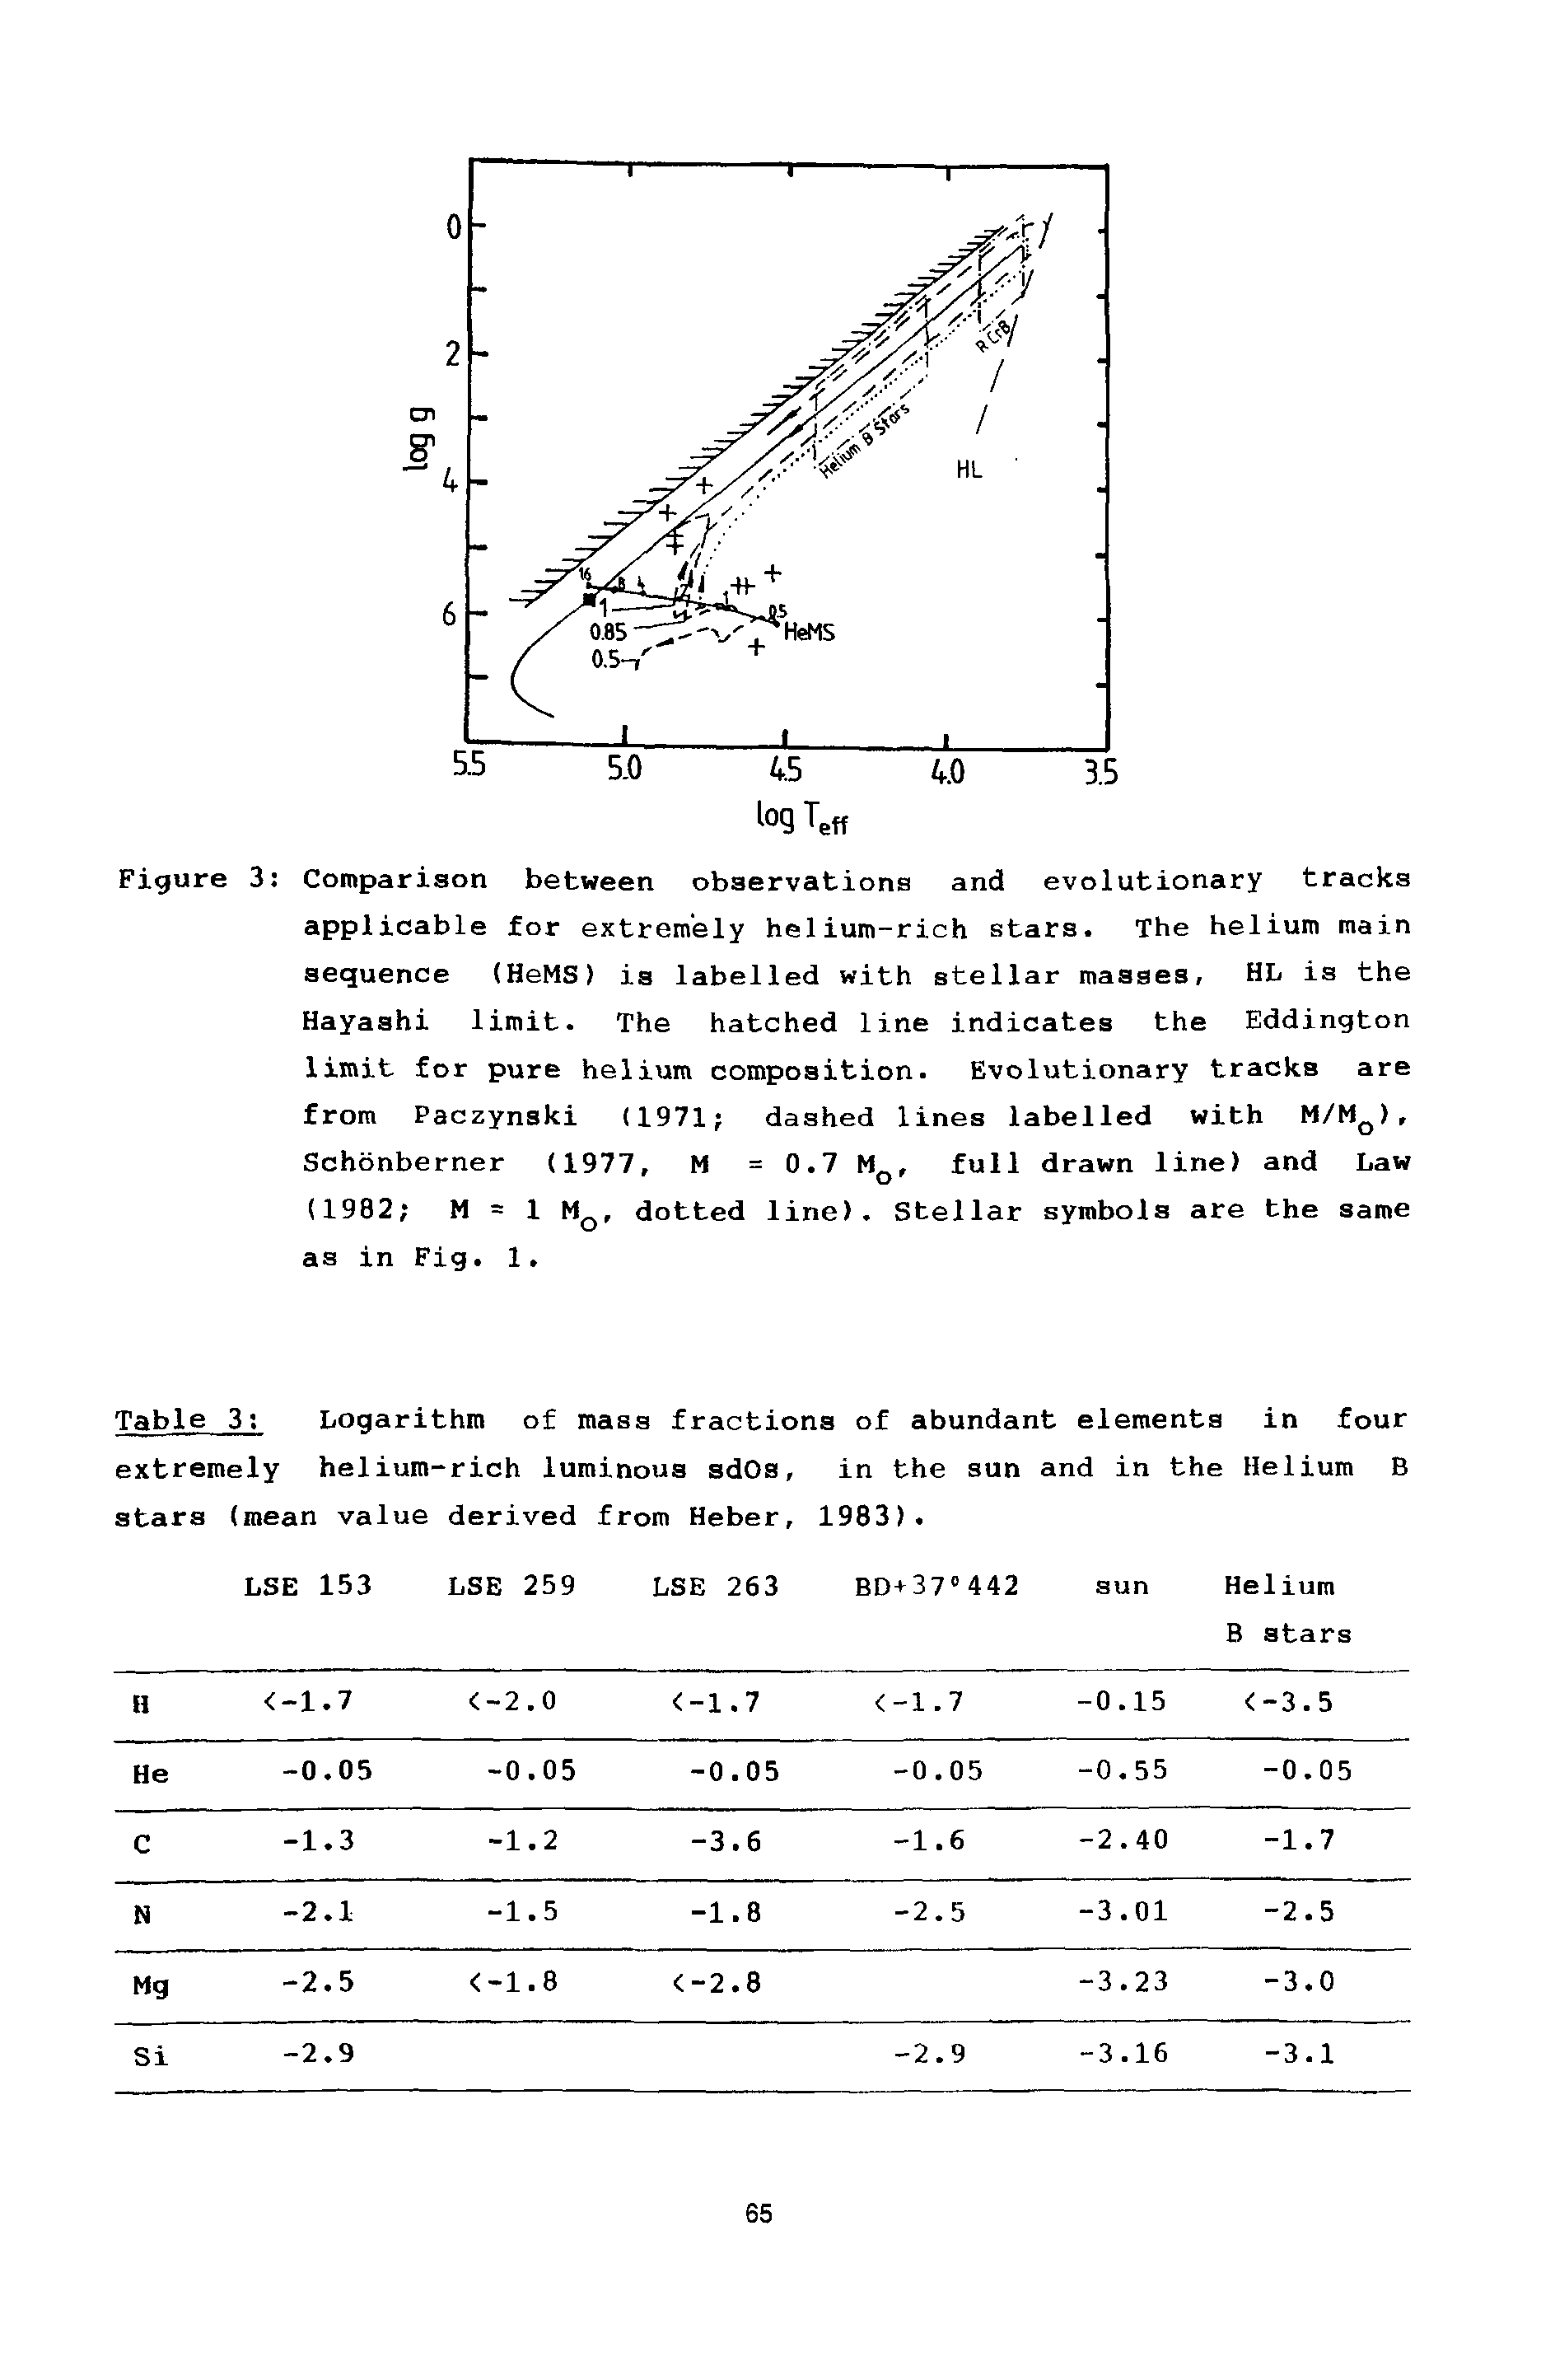 Table 3 Logarithm of mass fractions of abundant elements in four extremely helium-rich luminous sdOs, in the sun and in the Helium B stars (mean value derived from Heber, 1983).